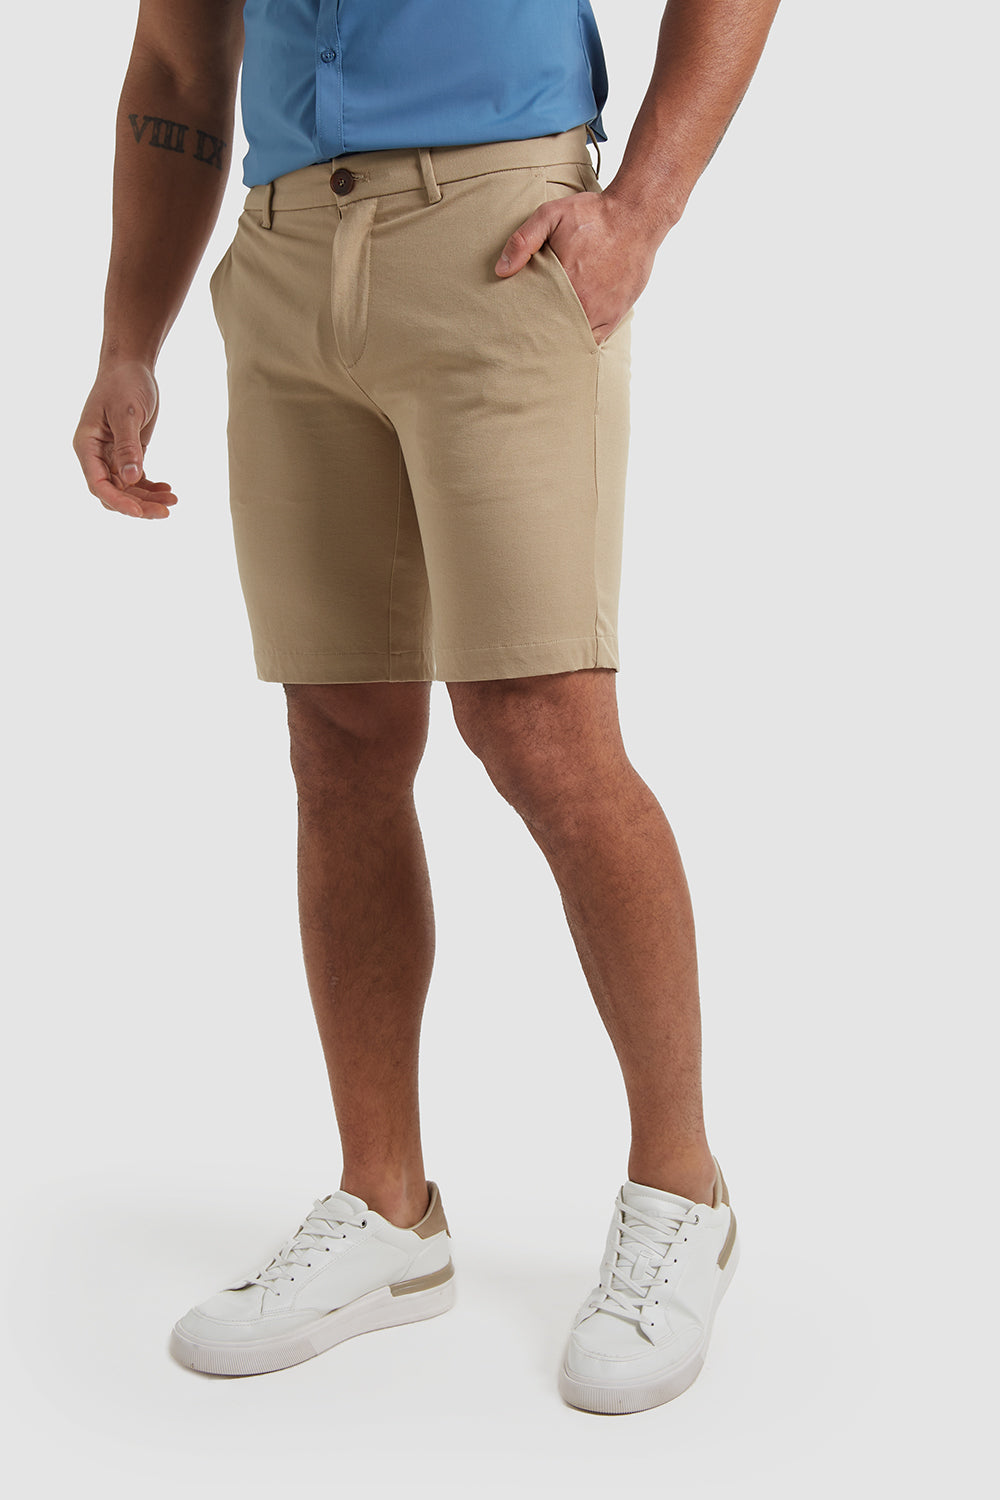 Muscle Fit Chino Shorts in Sand - TAILORED ATHLETE - ROW